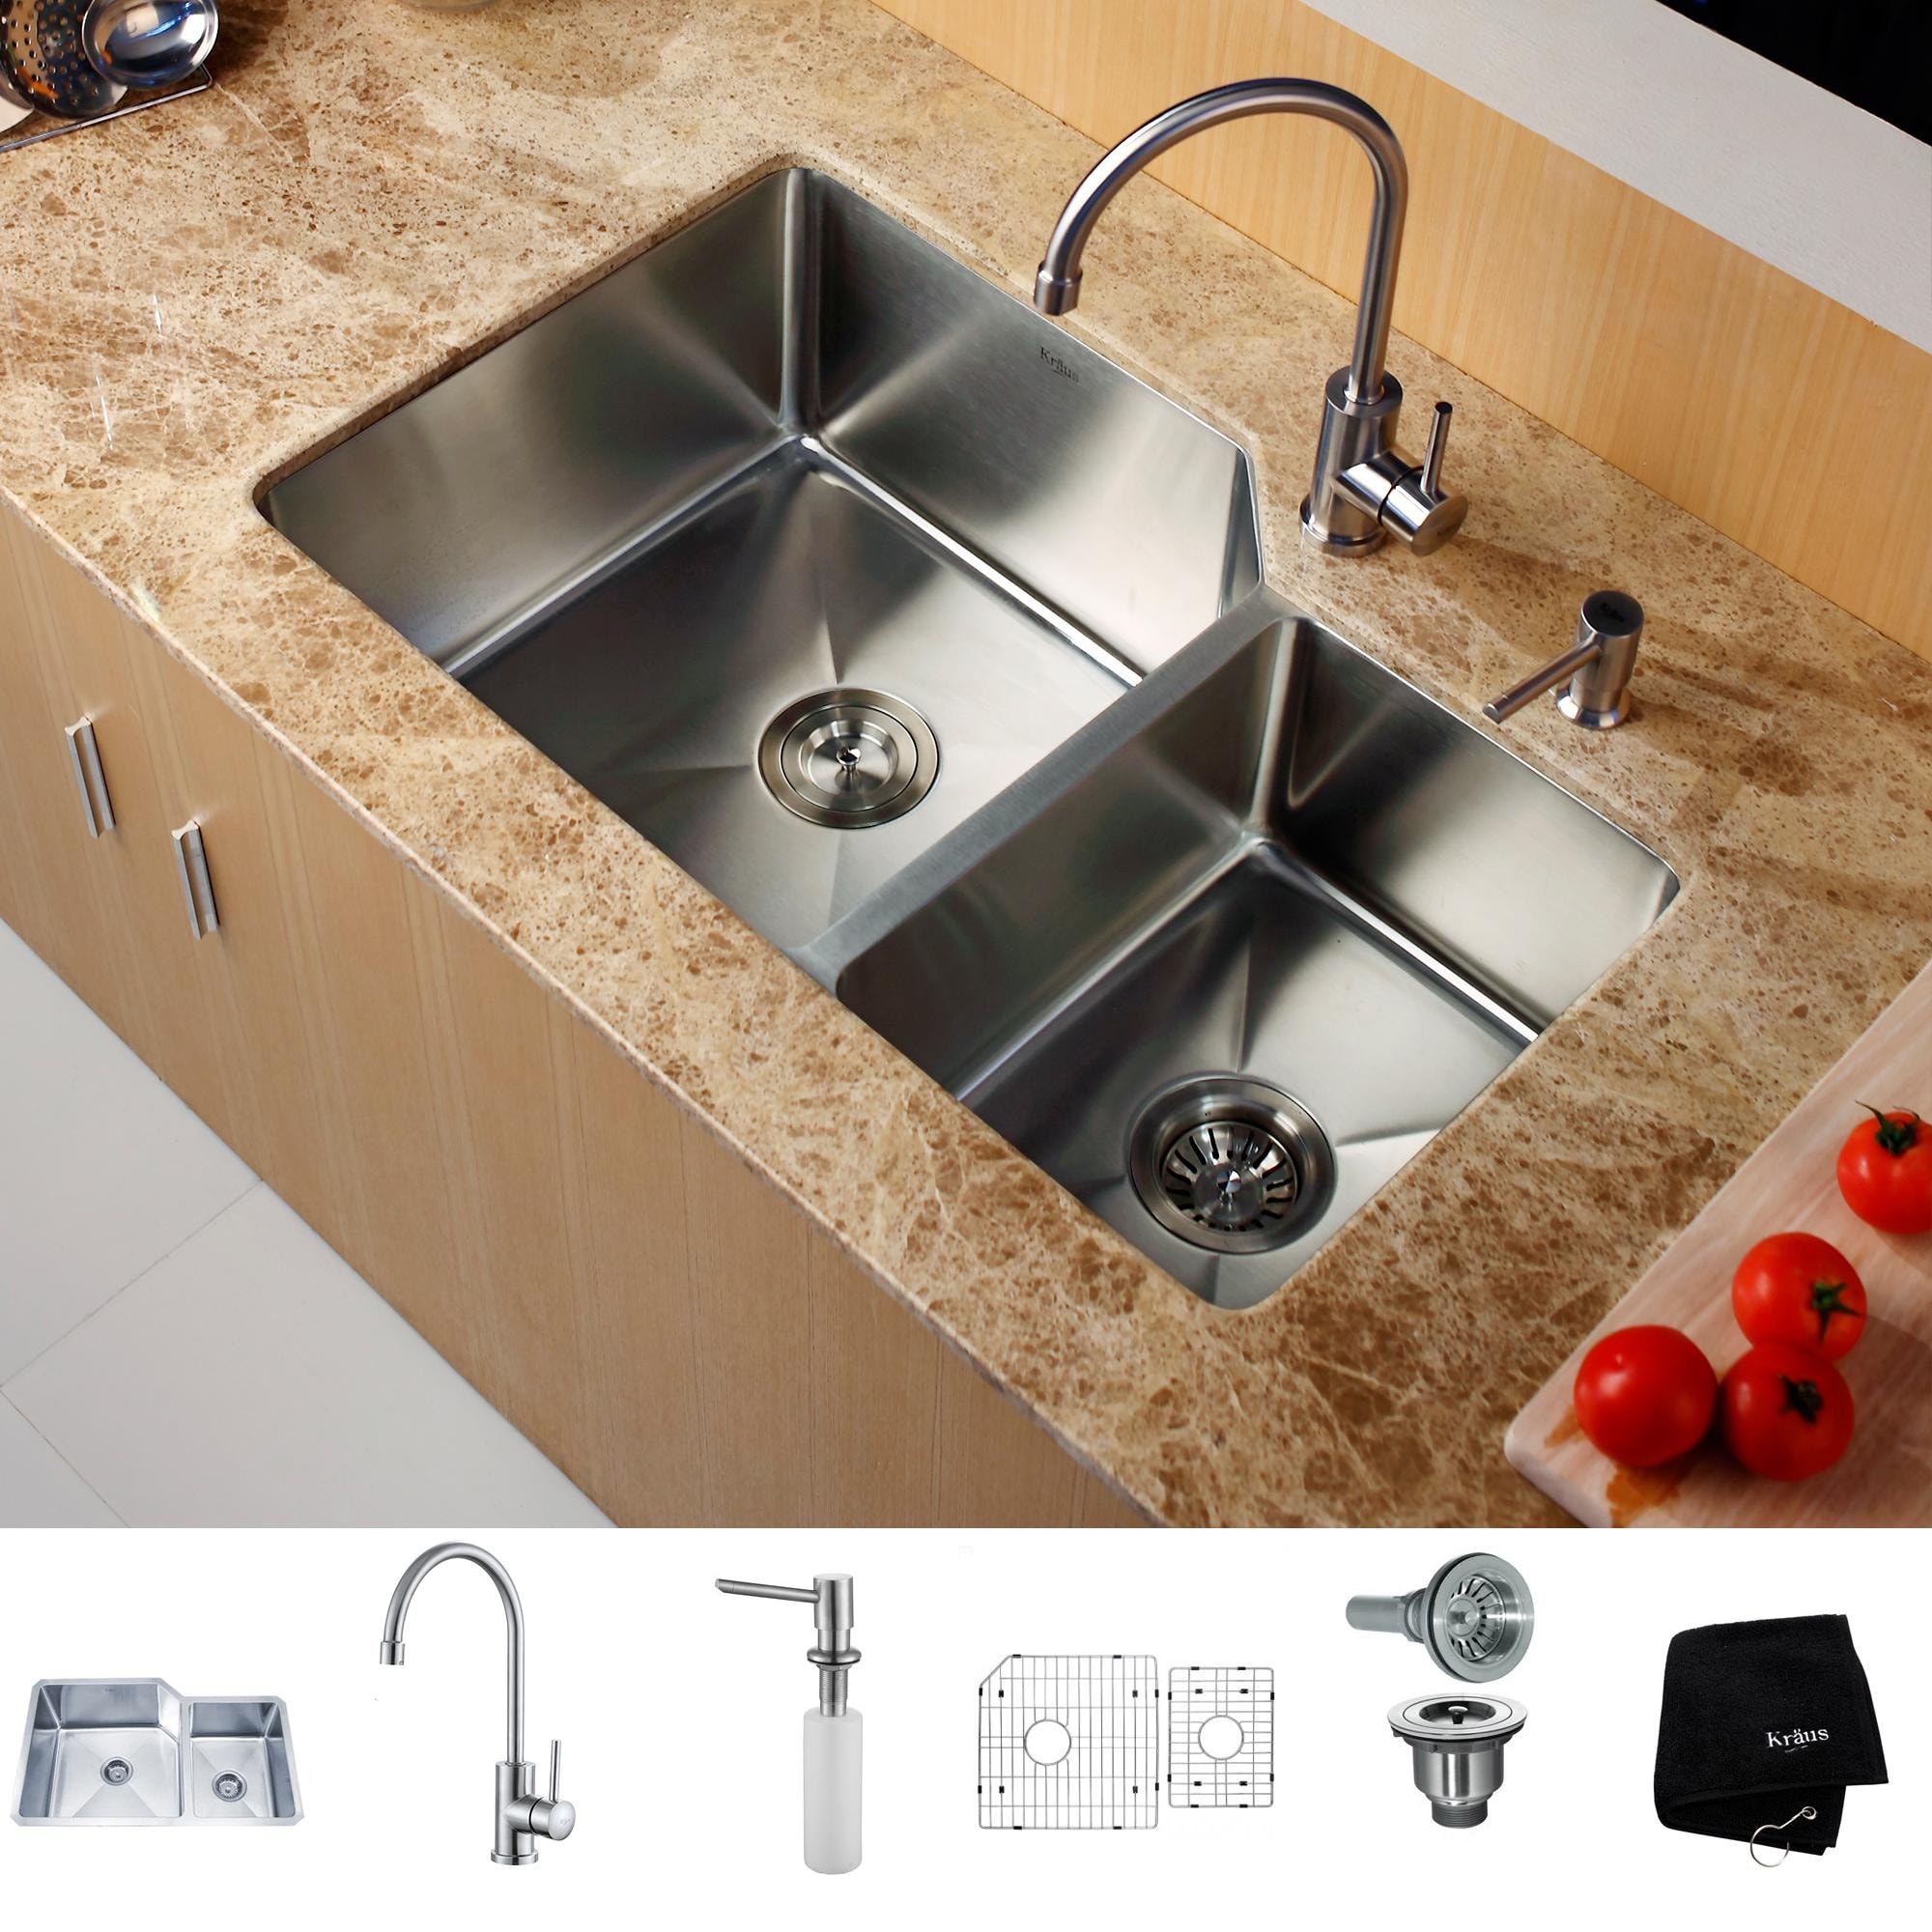 https://ak1.ostkcdn.com/images/products/4389947/Kraus-Kitchen-Combo-Set-Stainless-Steel-Undermount-Sink-with-Faucet-L12354531.jpg